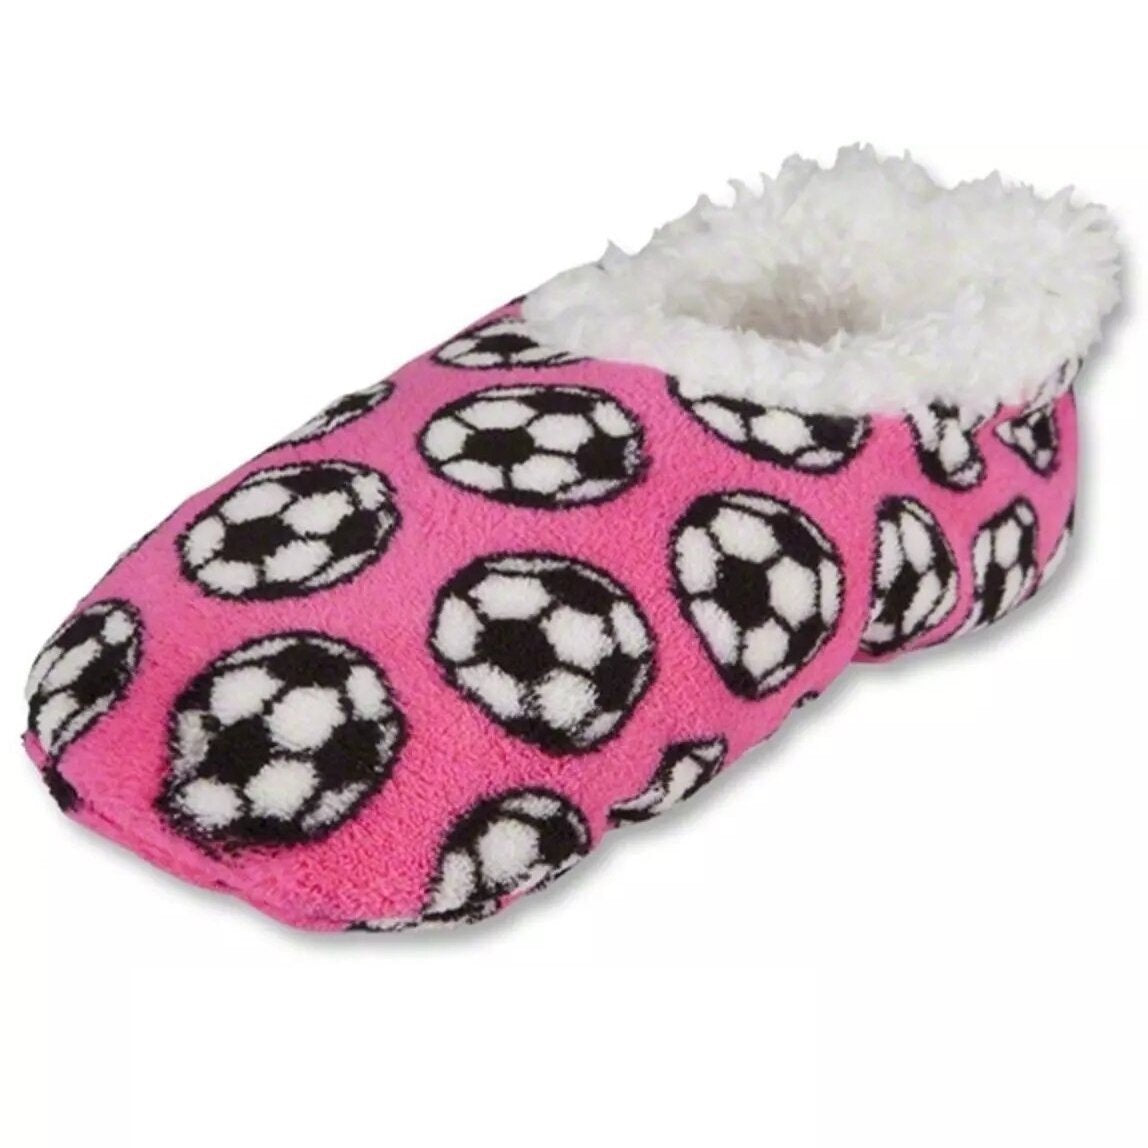 Snoozies Children Foot Covering - Pink-White-Black